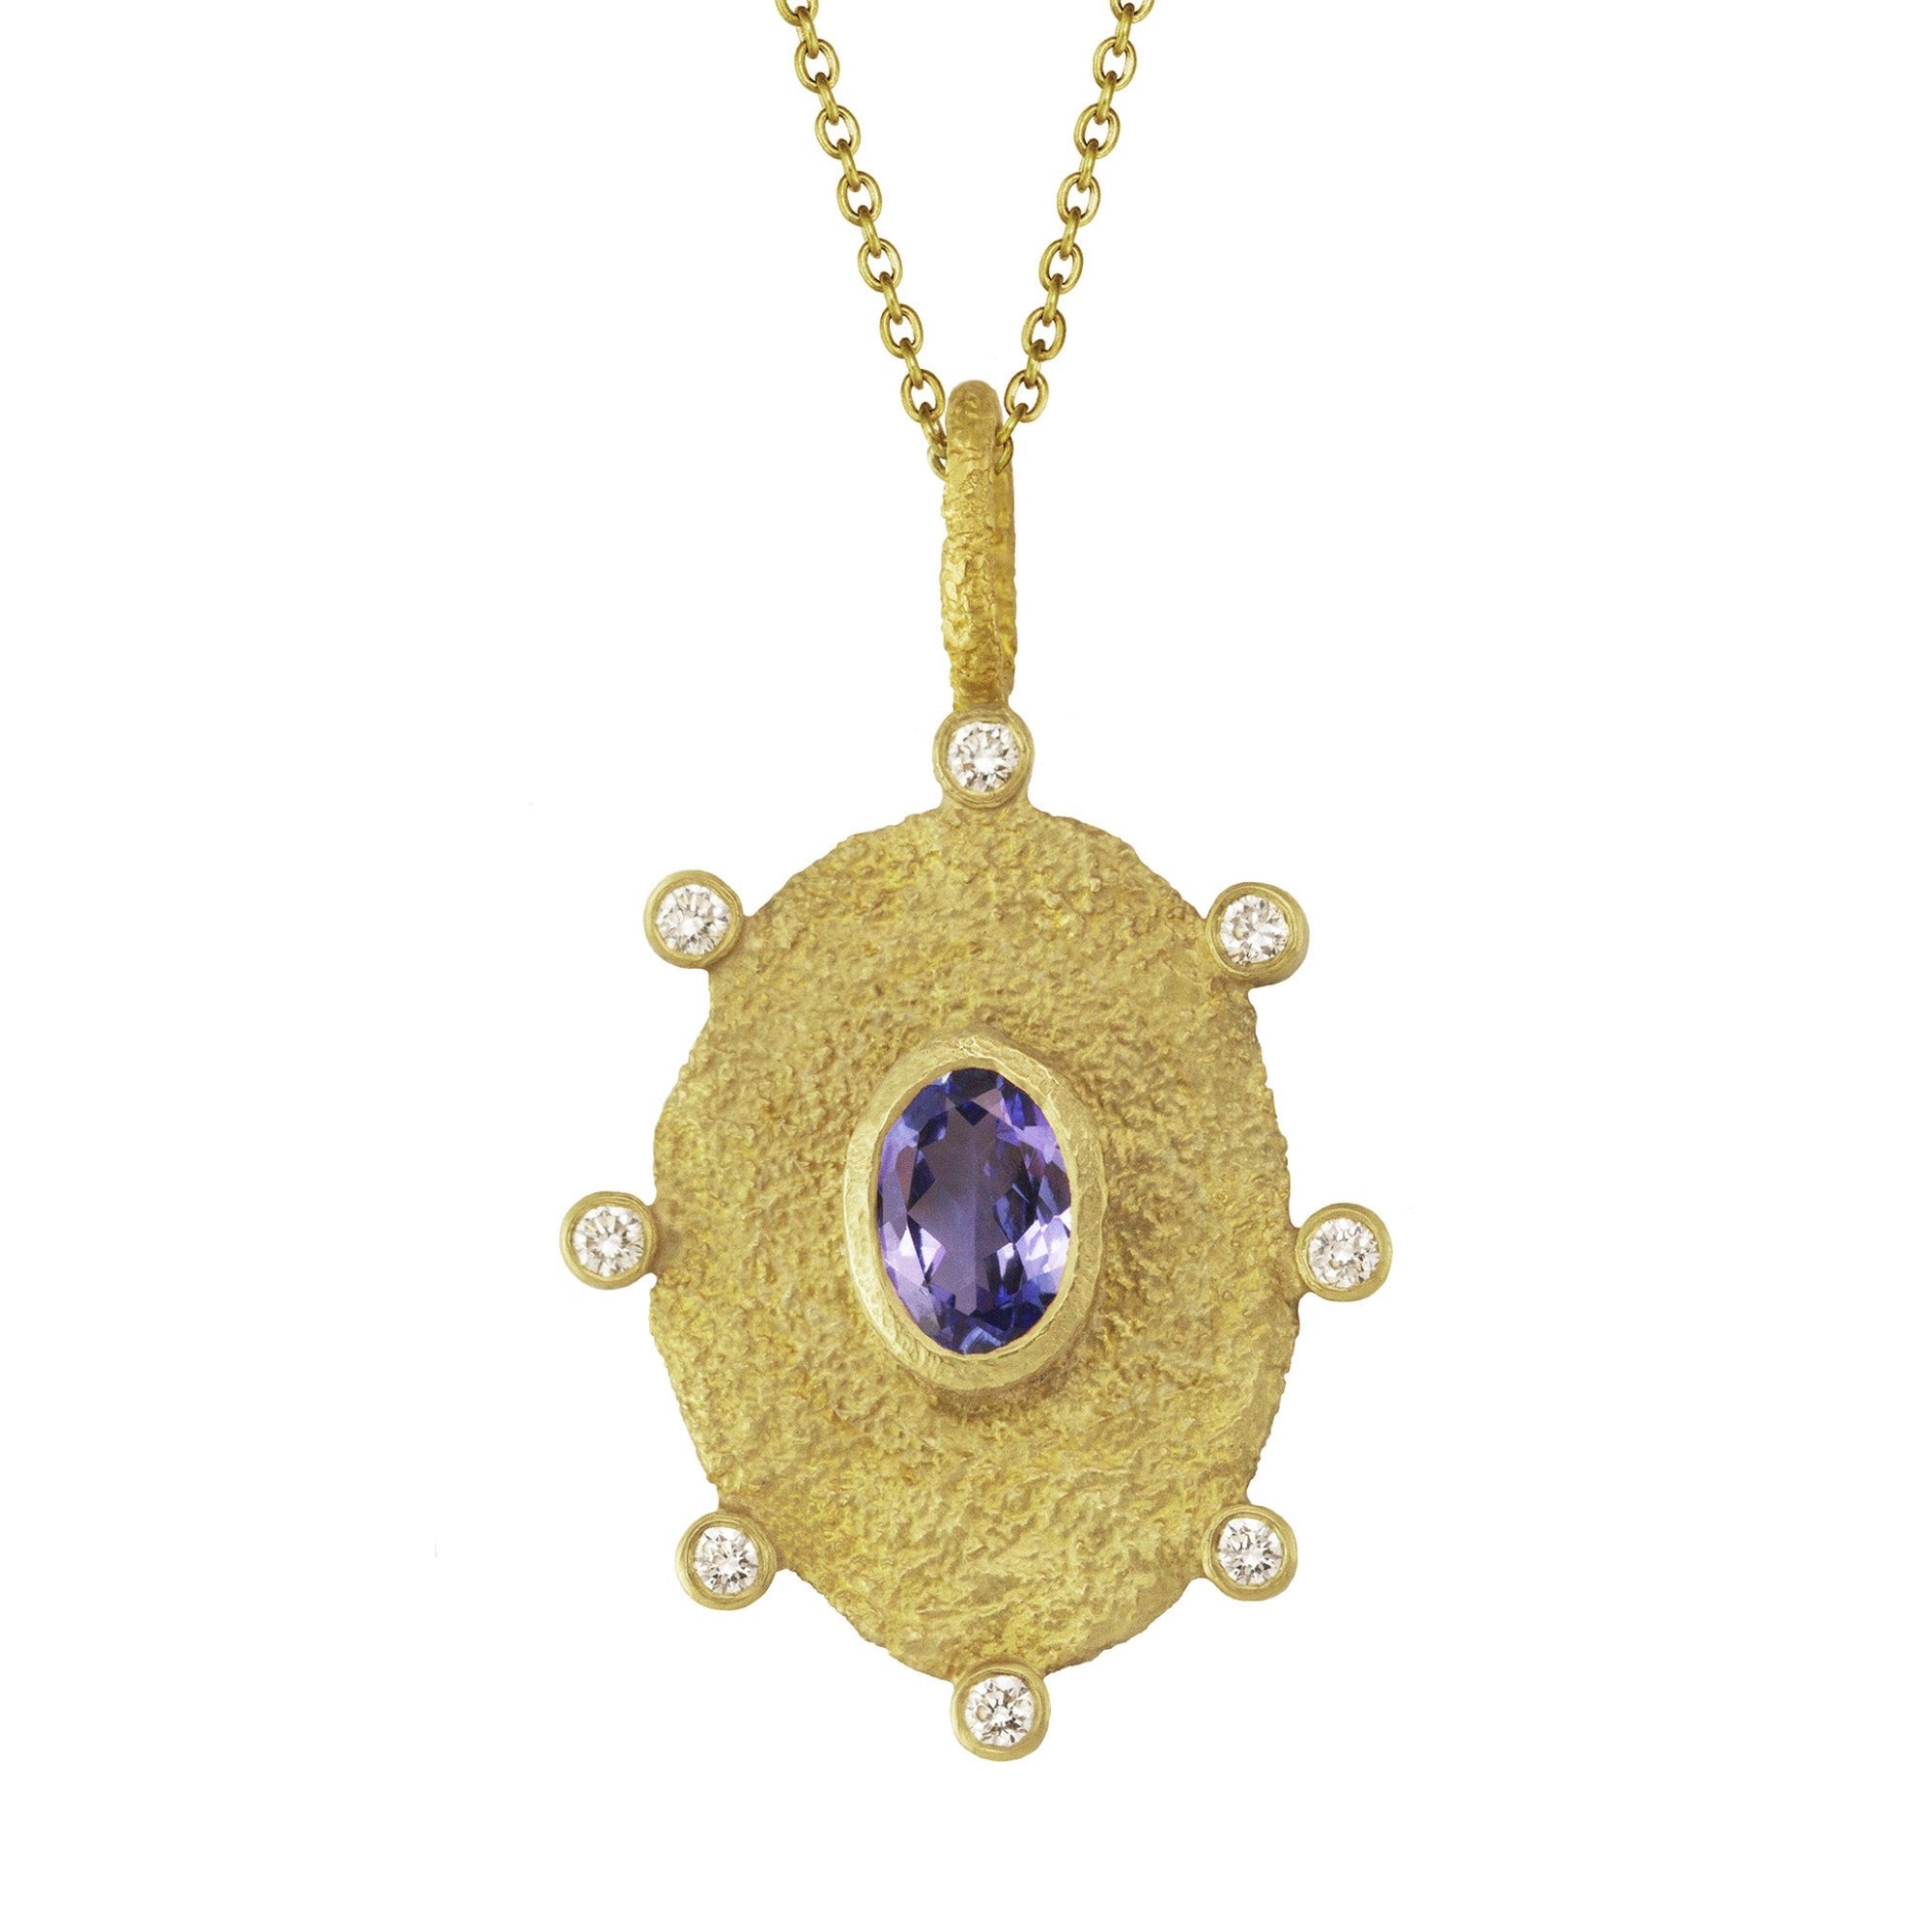 Rustic Tanzanite Necklace by Laurie Kaiser available at Talisman Collection Fine Jewelers in El Dorado Hills, CA and online.This pendant necklace features an oval cut tanzanite and 0.12 carats of brilliant white diamonds, all set in 18k gold. The organic shaped oval pendant hangs from a delicate 16" yellow gold chain. This necklace will add a touch of natural beauty to any outfit.